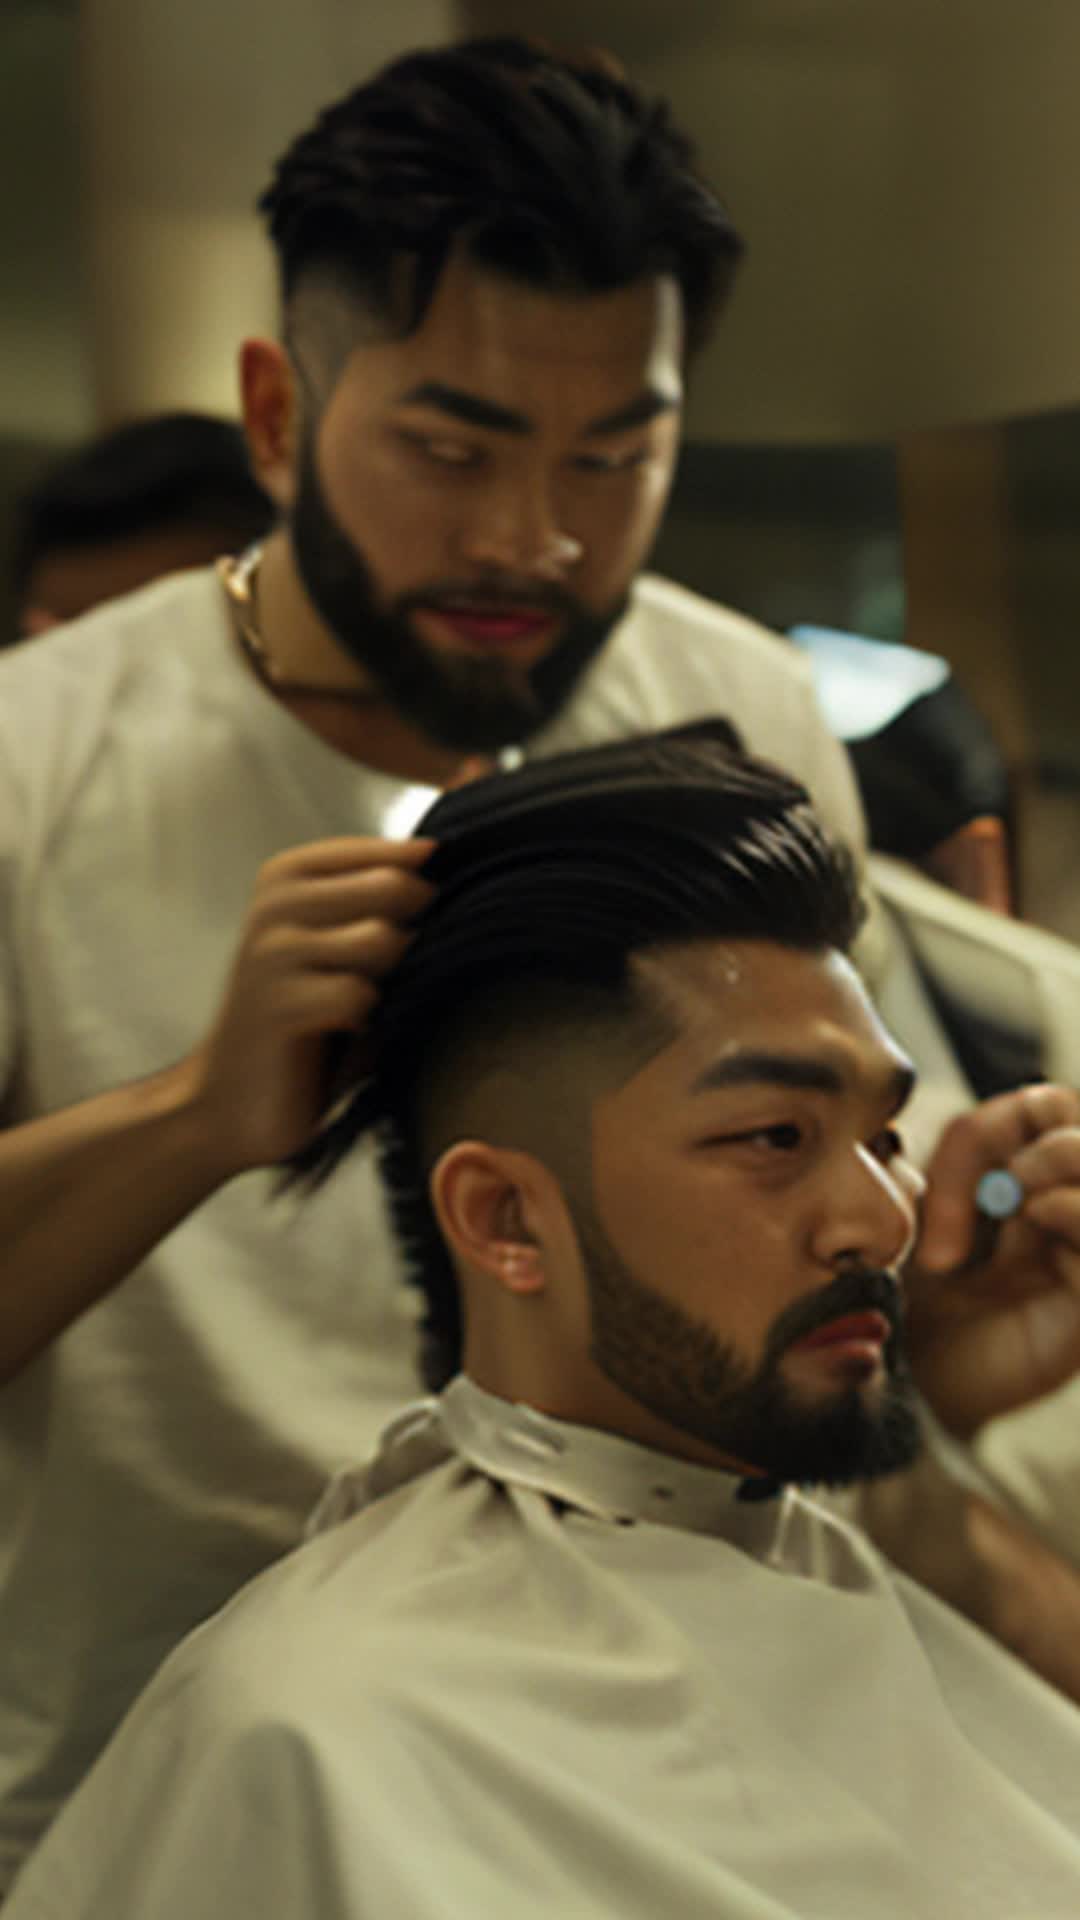 Bustling Chicago barbershop, young Asian man, excited, barber swiftly sculpting beard, precise movements, razor humming, reflection mirror, gleaming eyes